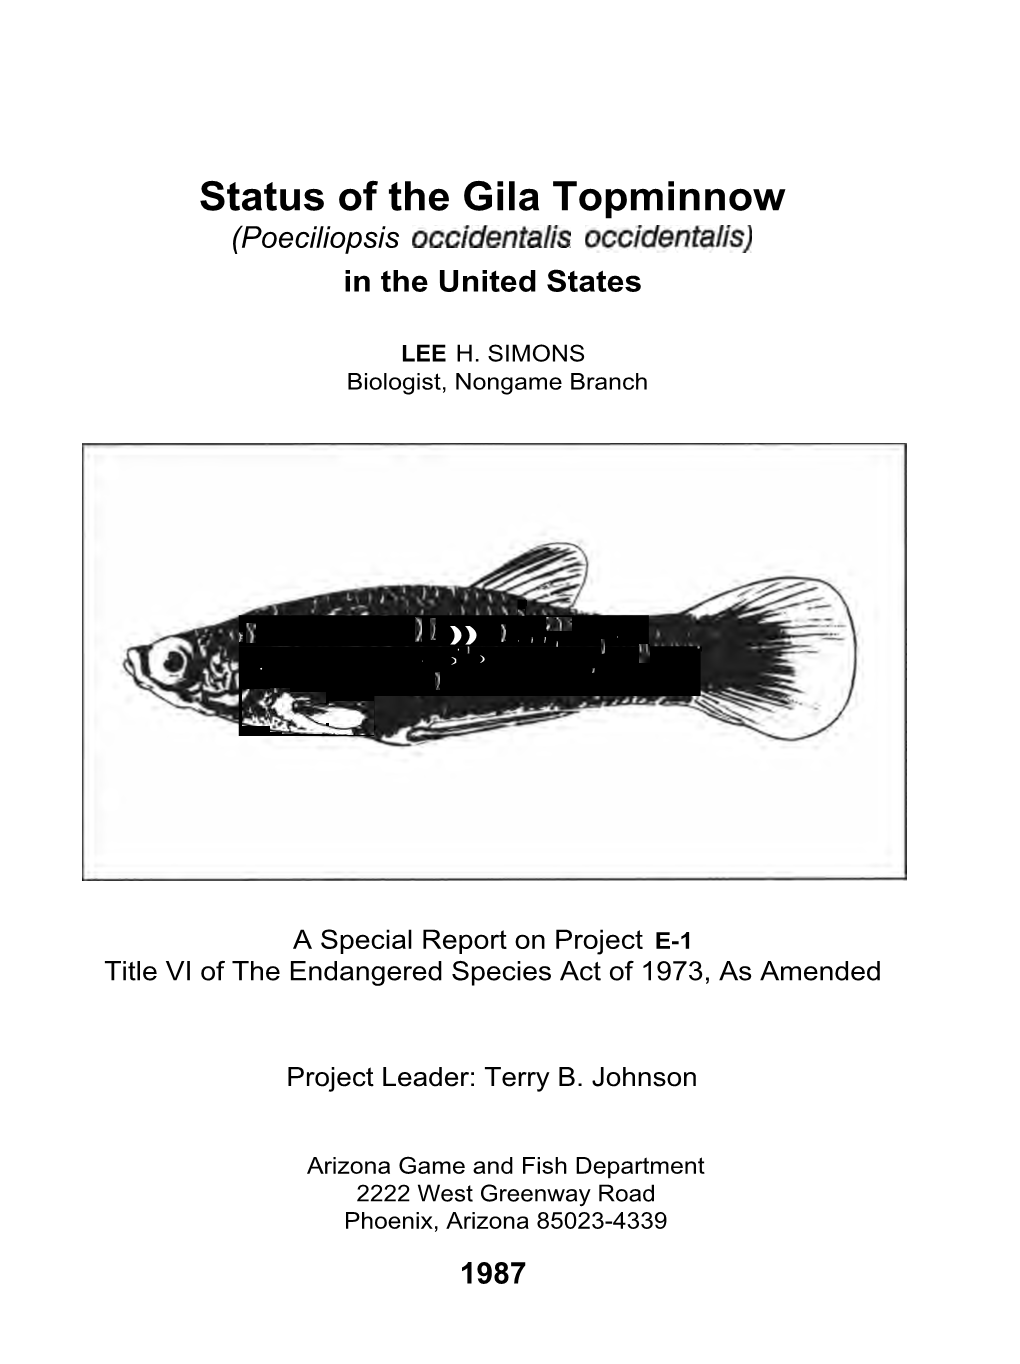 Status of the Gila Topminnow (Poeciliopsis Occidentalis Occidentalis) in the United States